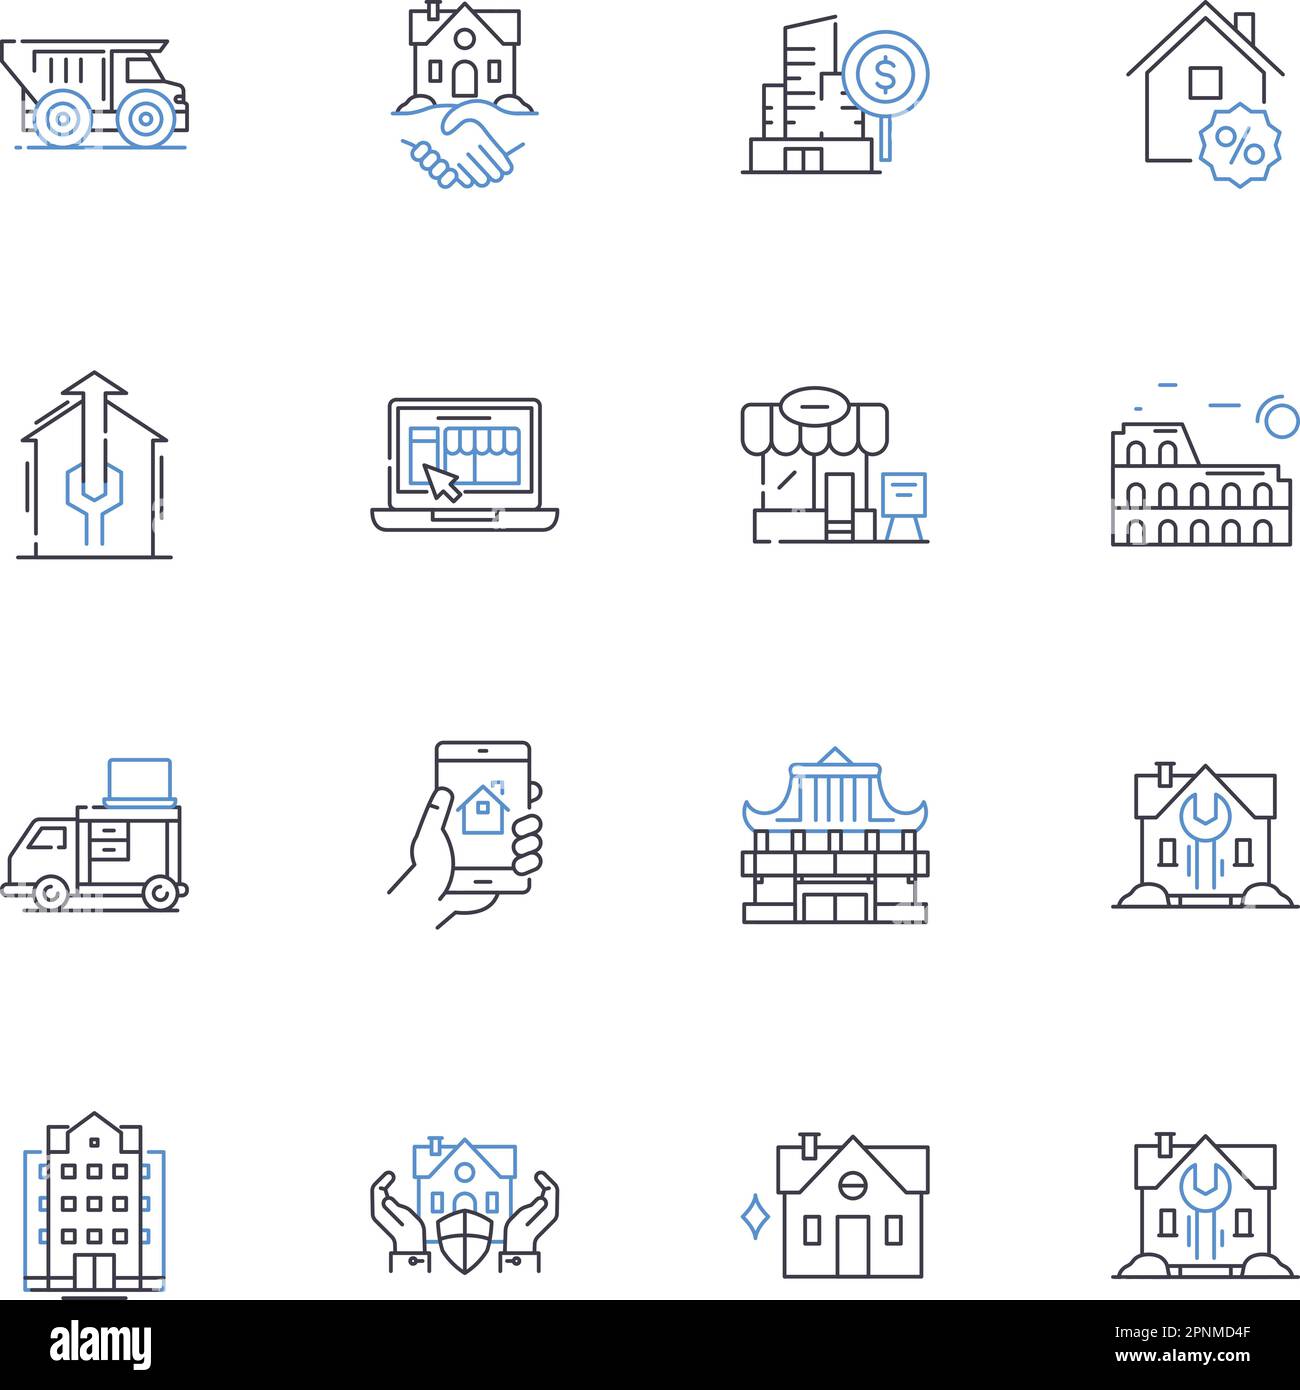 Castle line icons collection. Medieval, Fortress, Royal, Turrets, Dungeons, Moat, Ramparts vector and linear illustration. Stronghold,Chateau,Keep Stock Vector